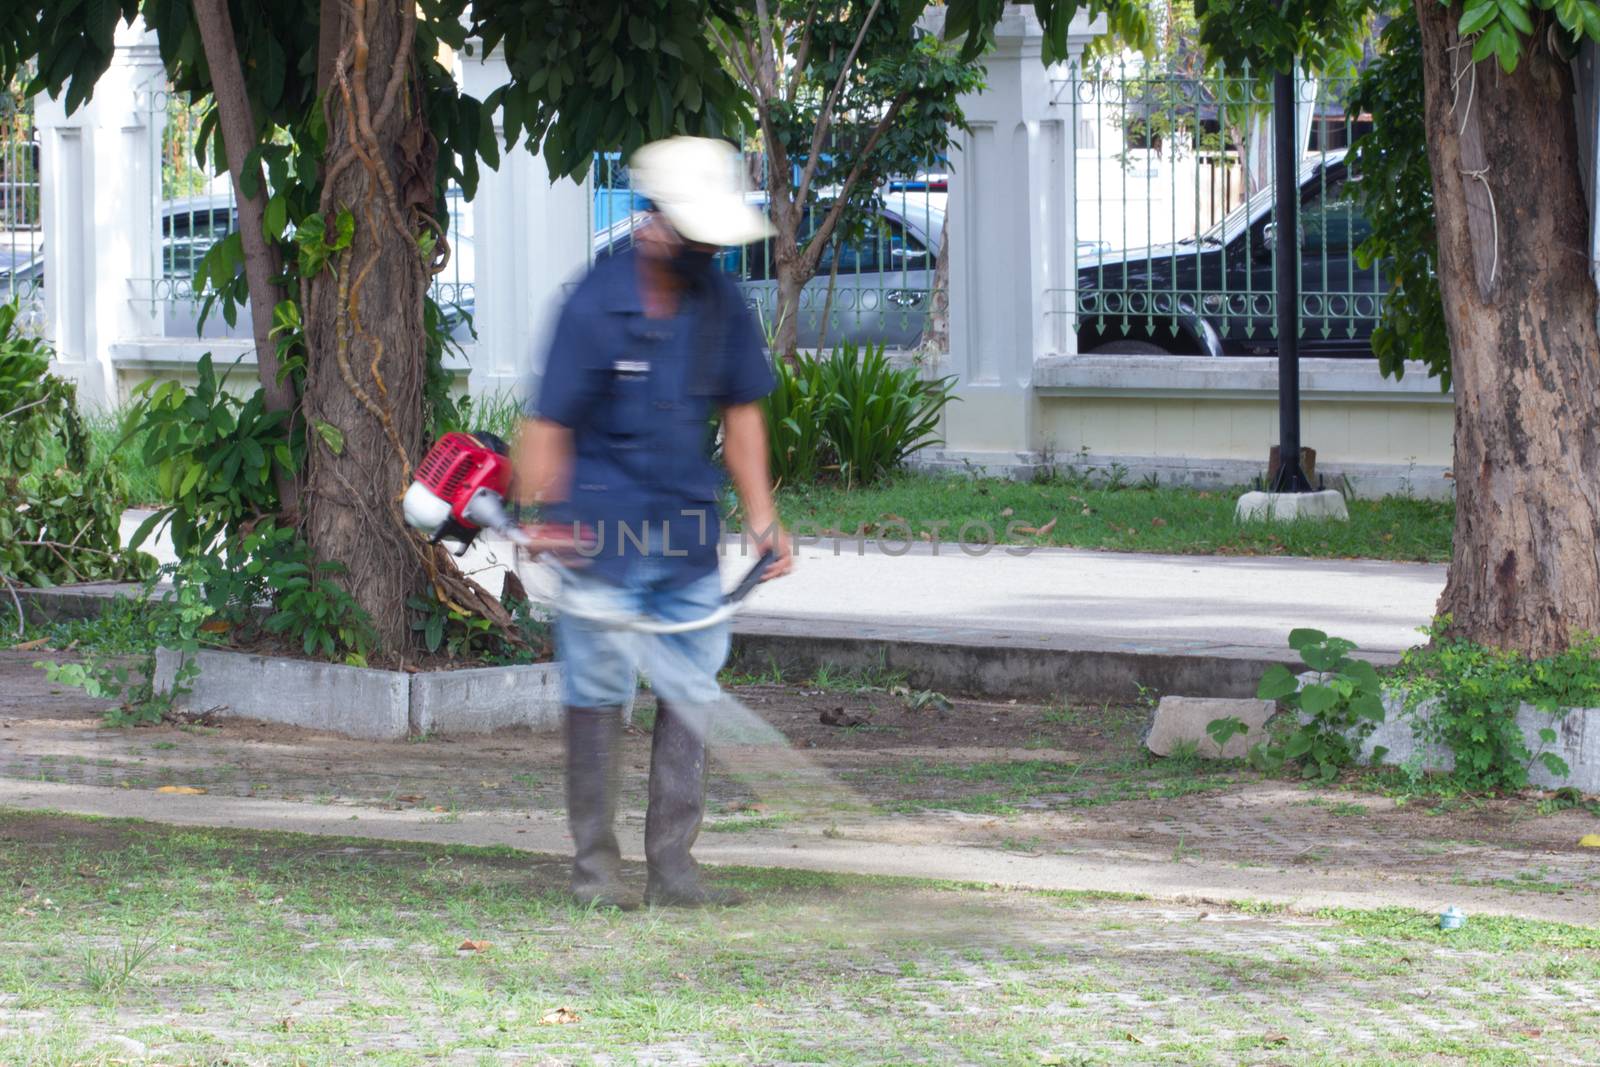 Blurred image of a man mowing the grass in public park by a3701027